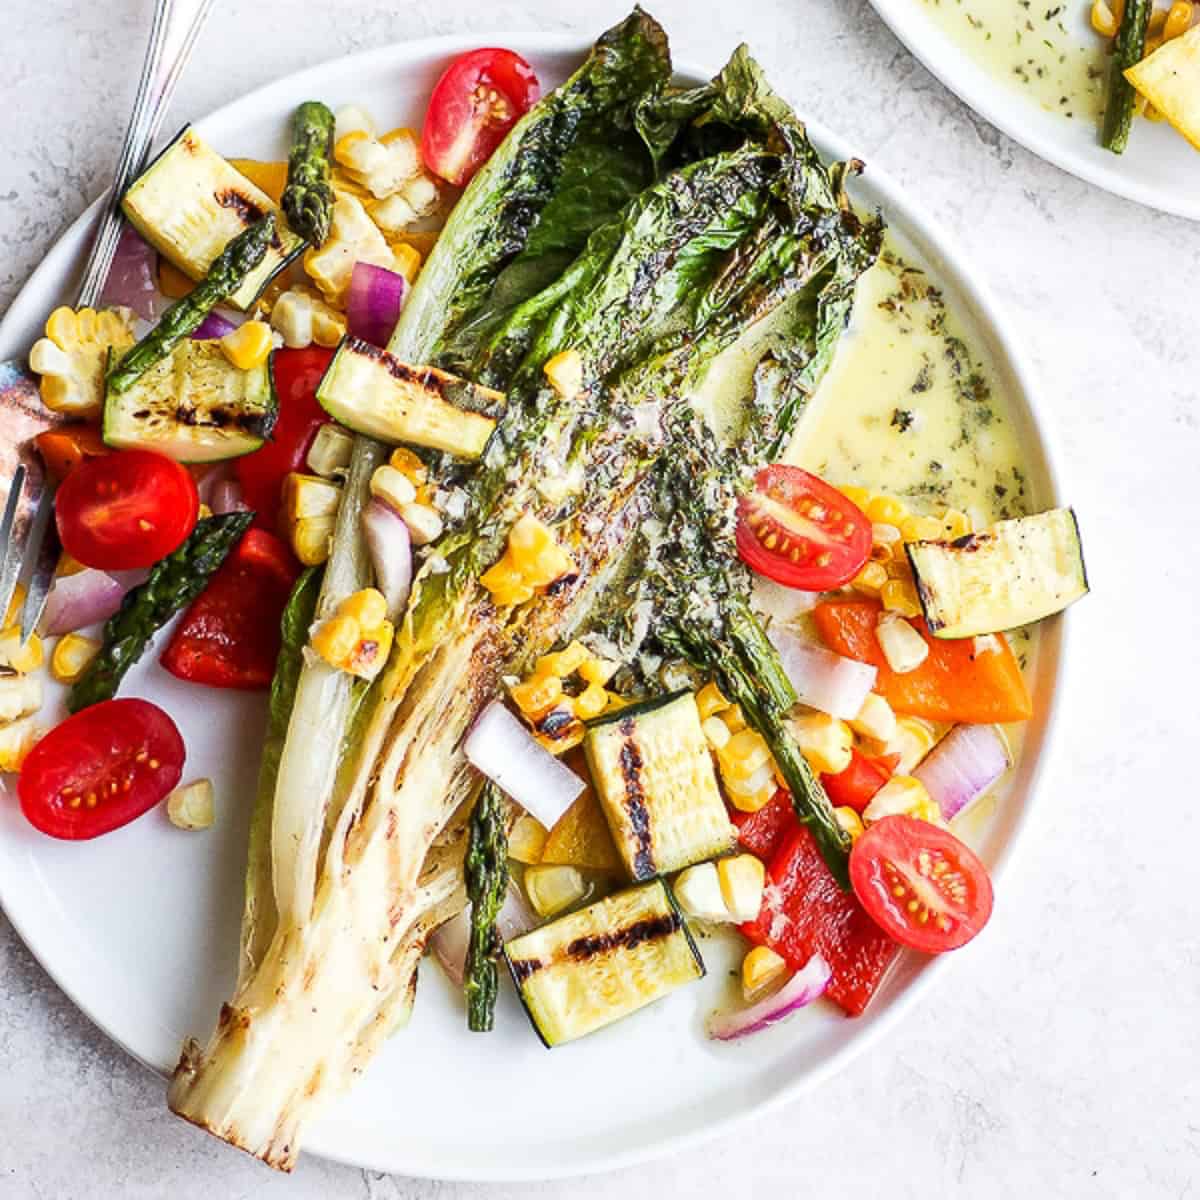 Recipe for a grilled vegetable salad.